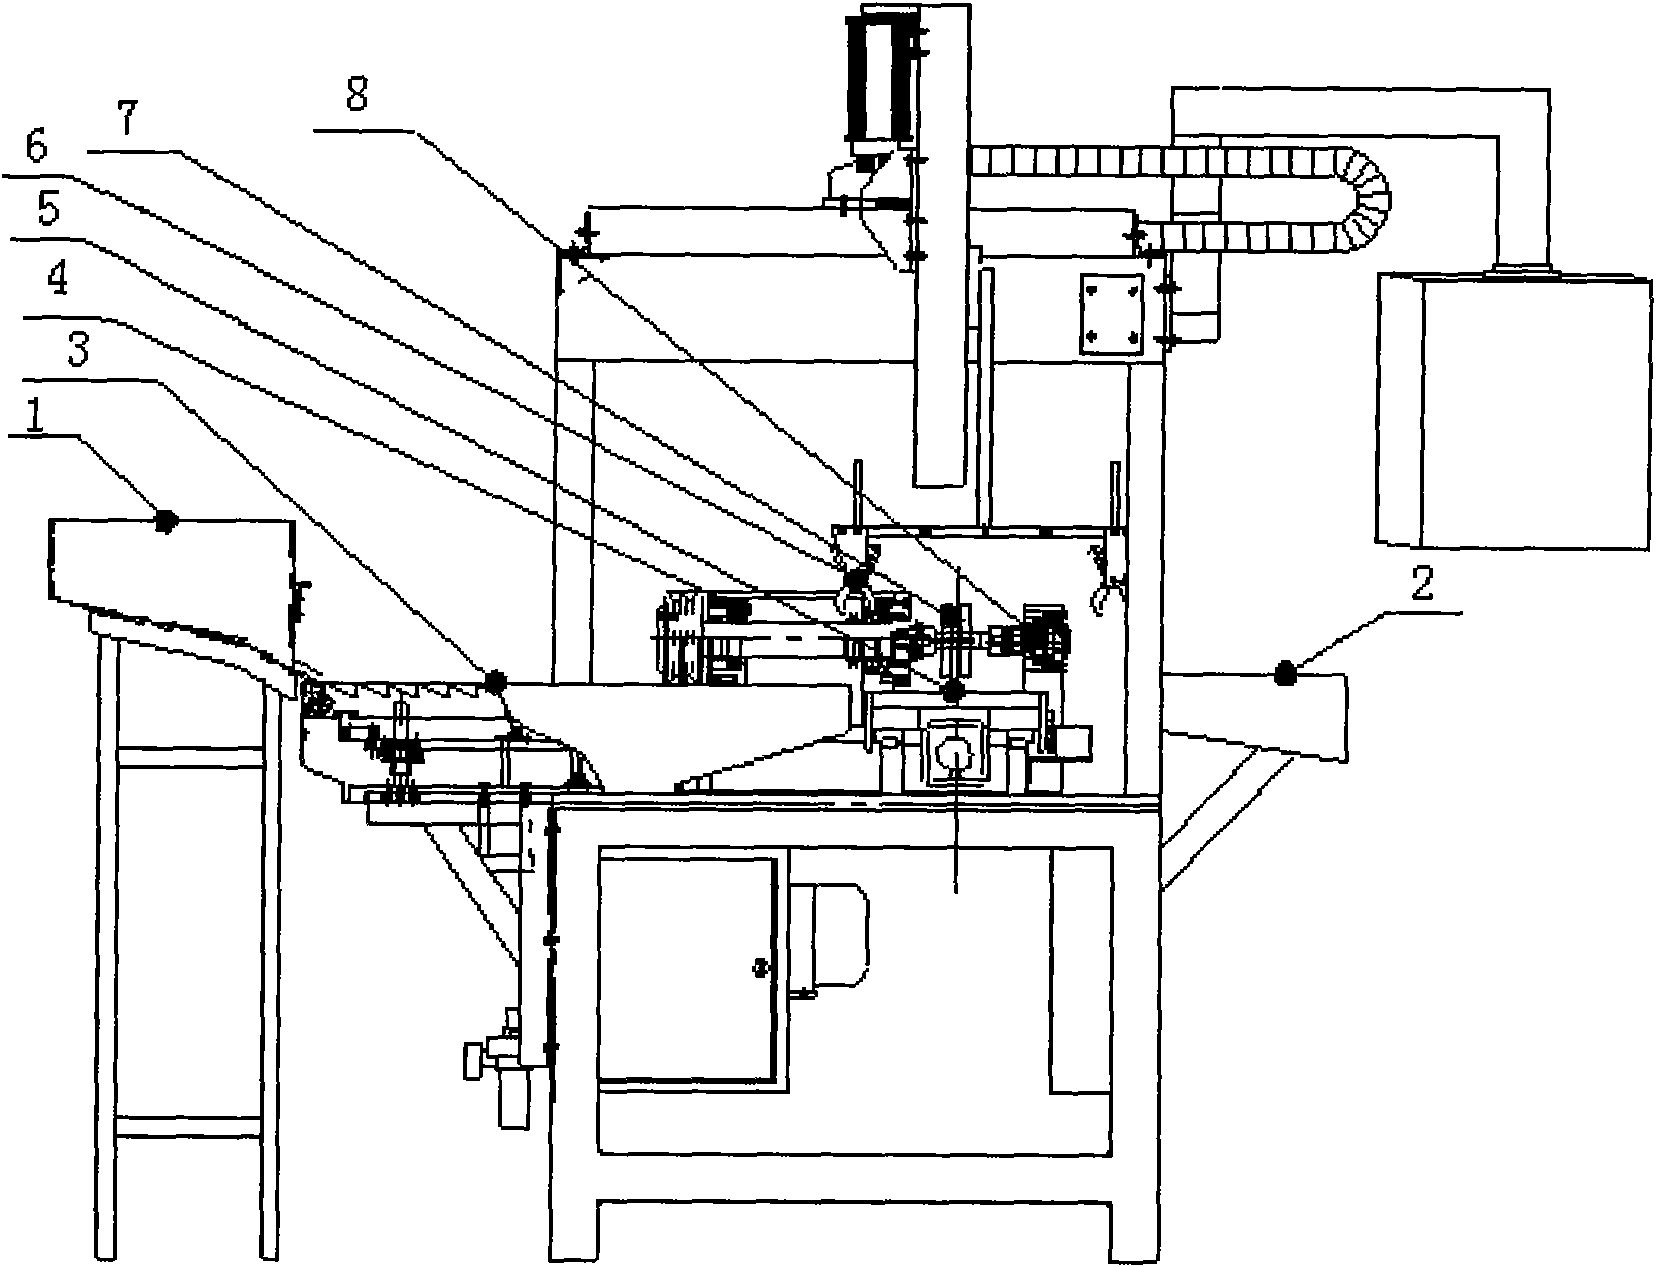 Full automatic numerical control connecting rod milling potential machine tool